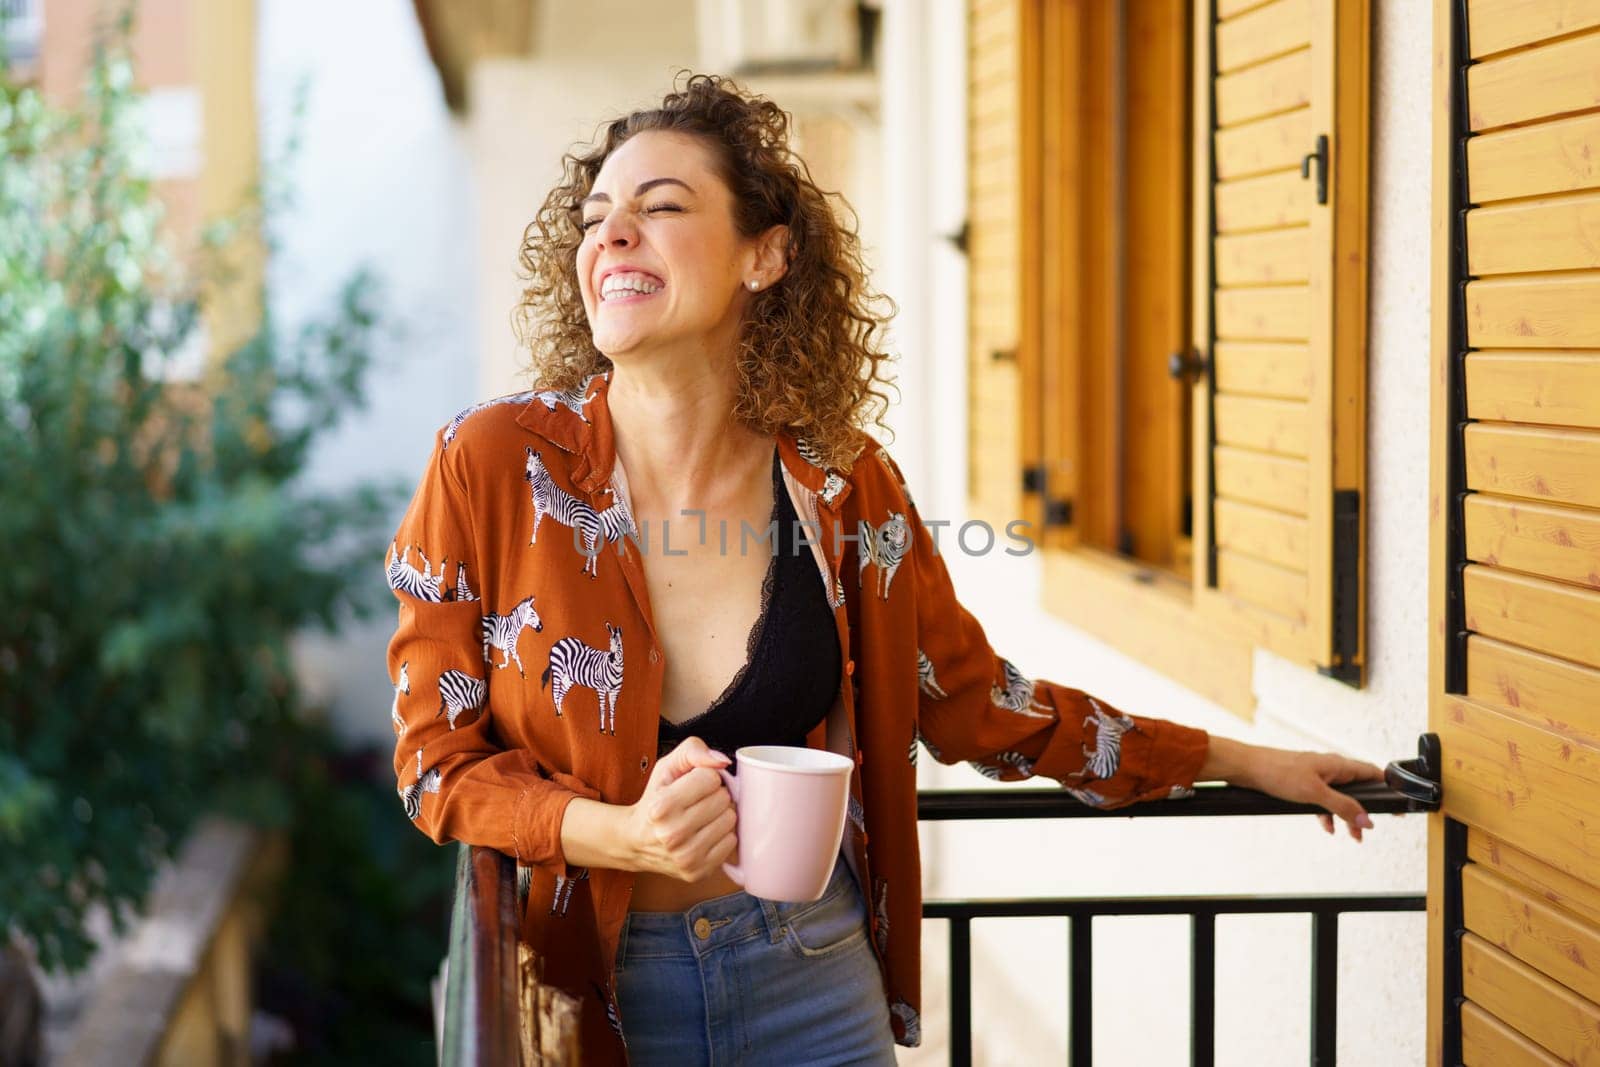 Cheerful young curly brunette haired female wearing stylish outfit with coffee cup leaning on balcony railing against blurred background